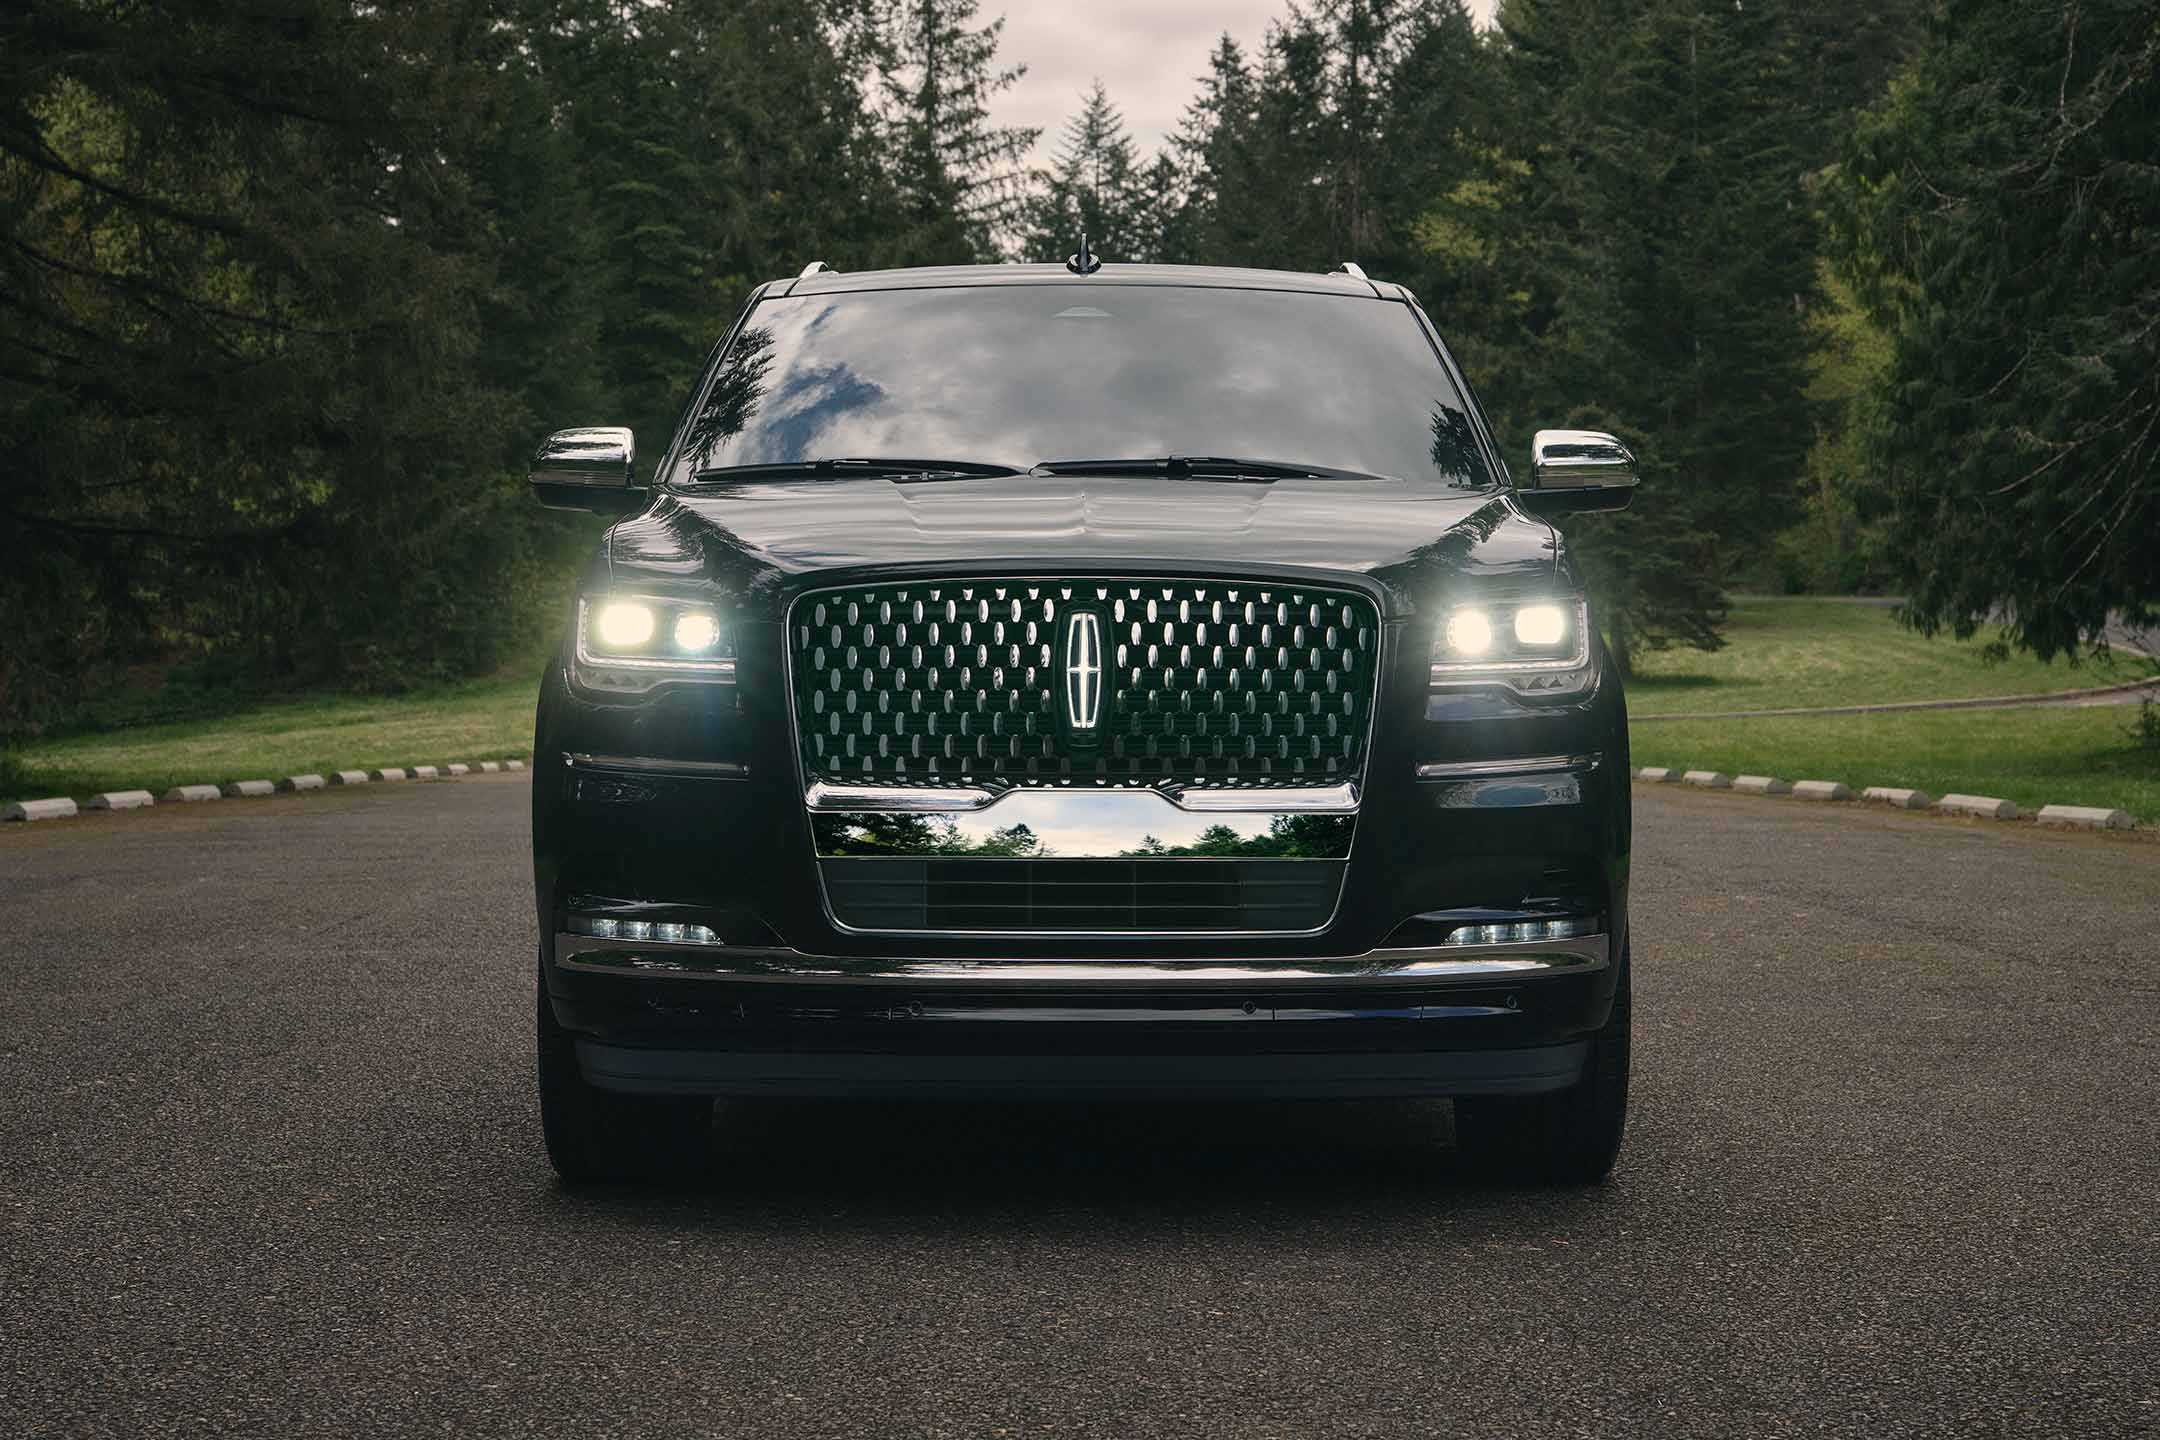 The available illuminated Lincoln Star on the Lincoln Black Label grille makes a bright statement framed by LED headlamps.